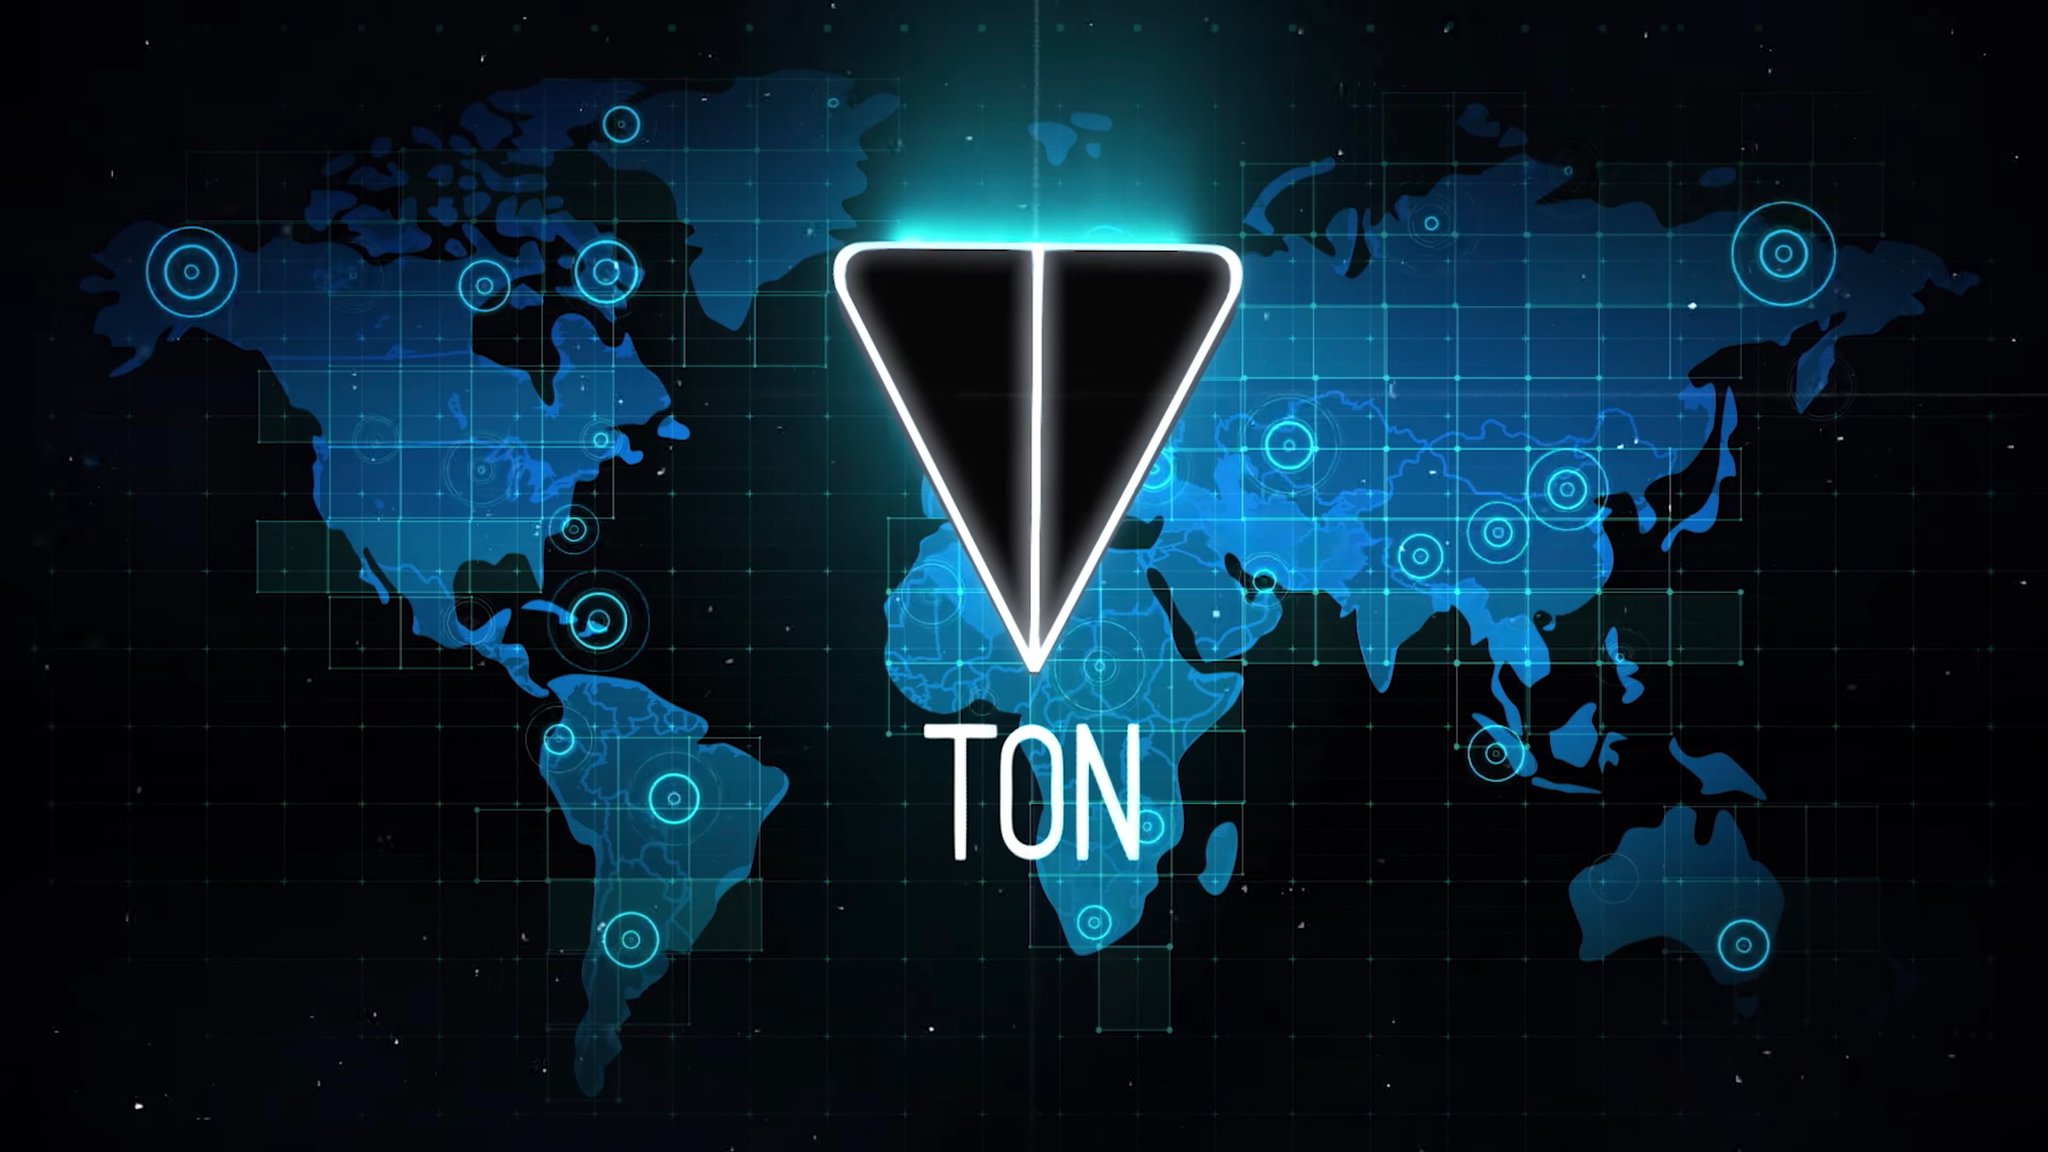 Cryptocurrency Toncoin of the TON blockchain